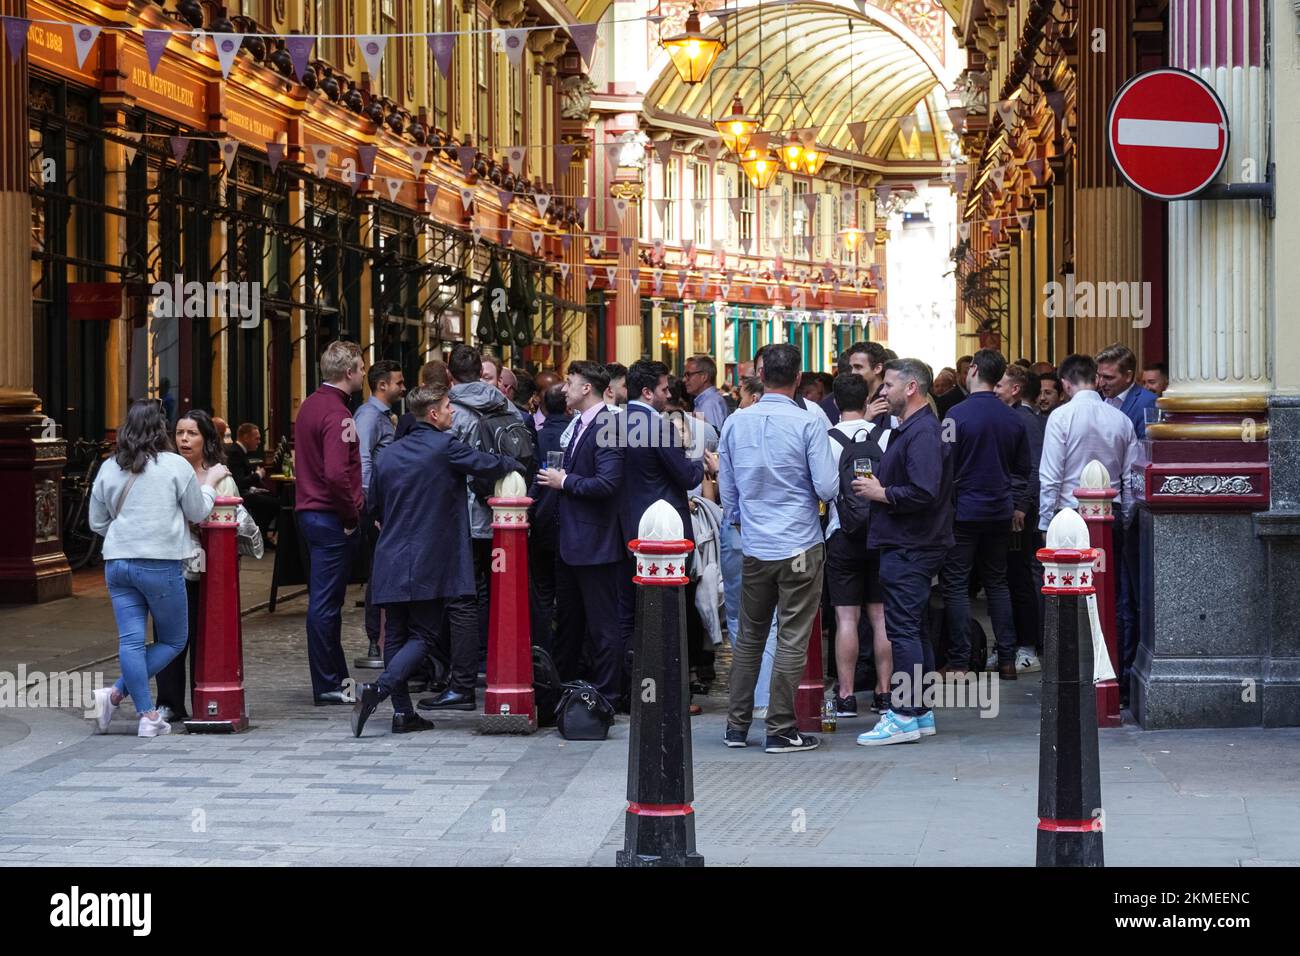 City workers drinking beer outside pub at Leadenhall Market in London, England, United Kingdom, UK Stock Photo